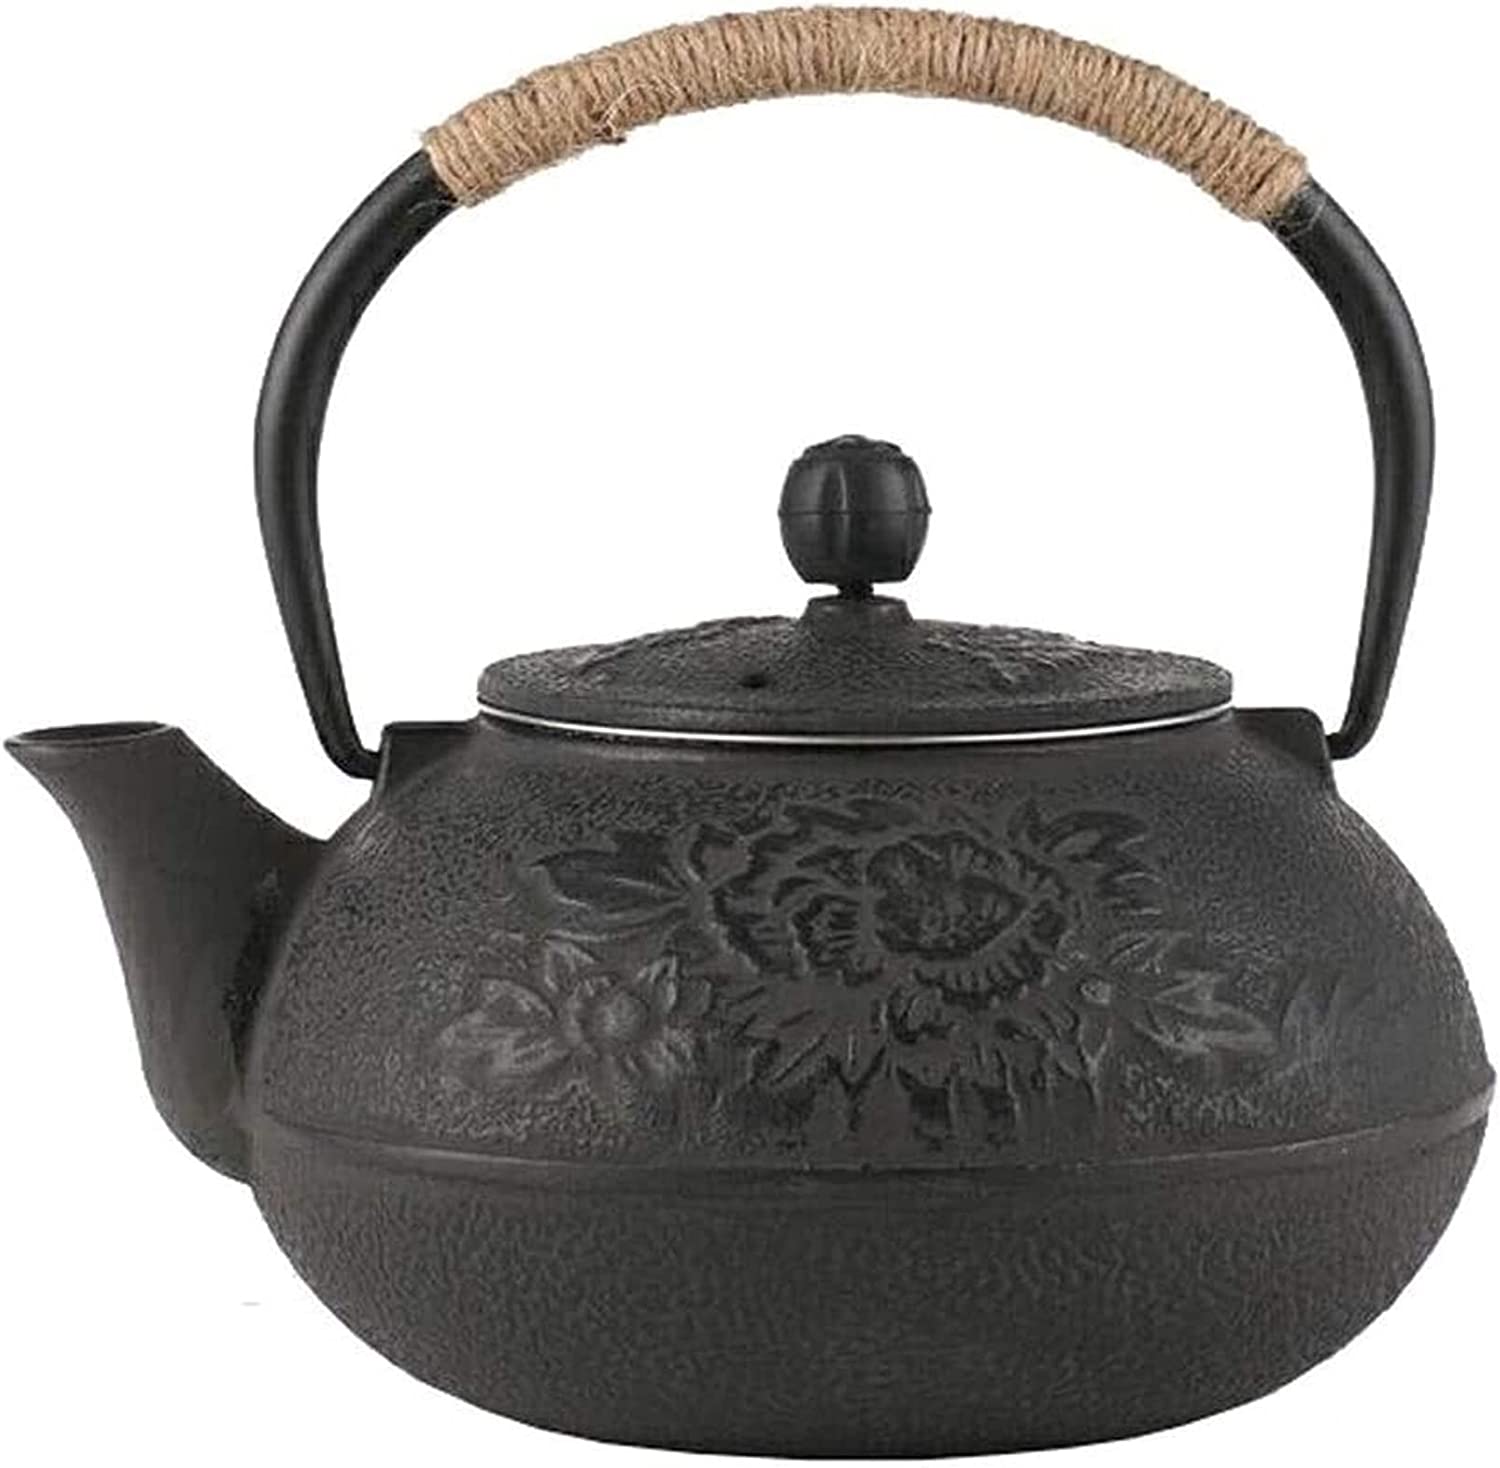 Teekannen Uomun Iron Cast Iron Stainless Steel Infuser Cast Iron Tea Kettle Cooker Cooking Top Flower Coated for 900 ml